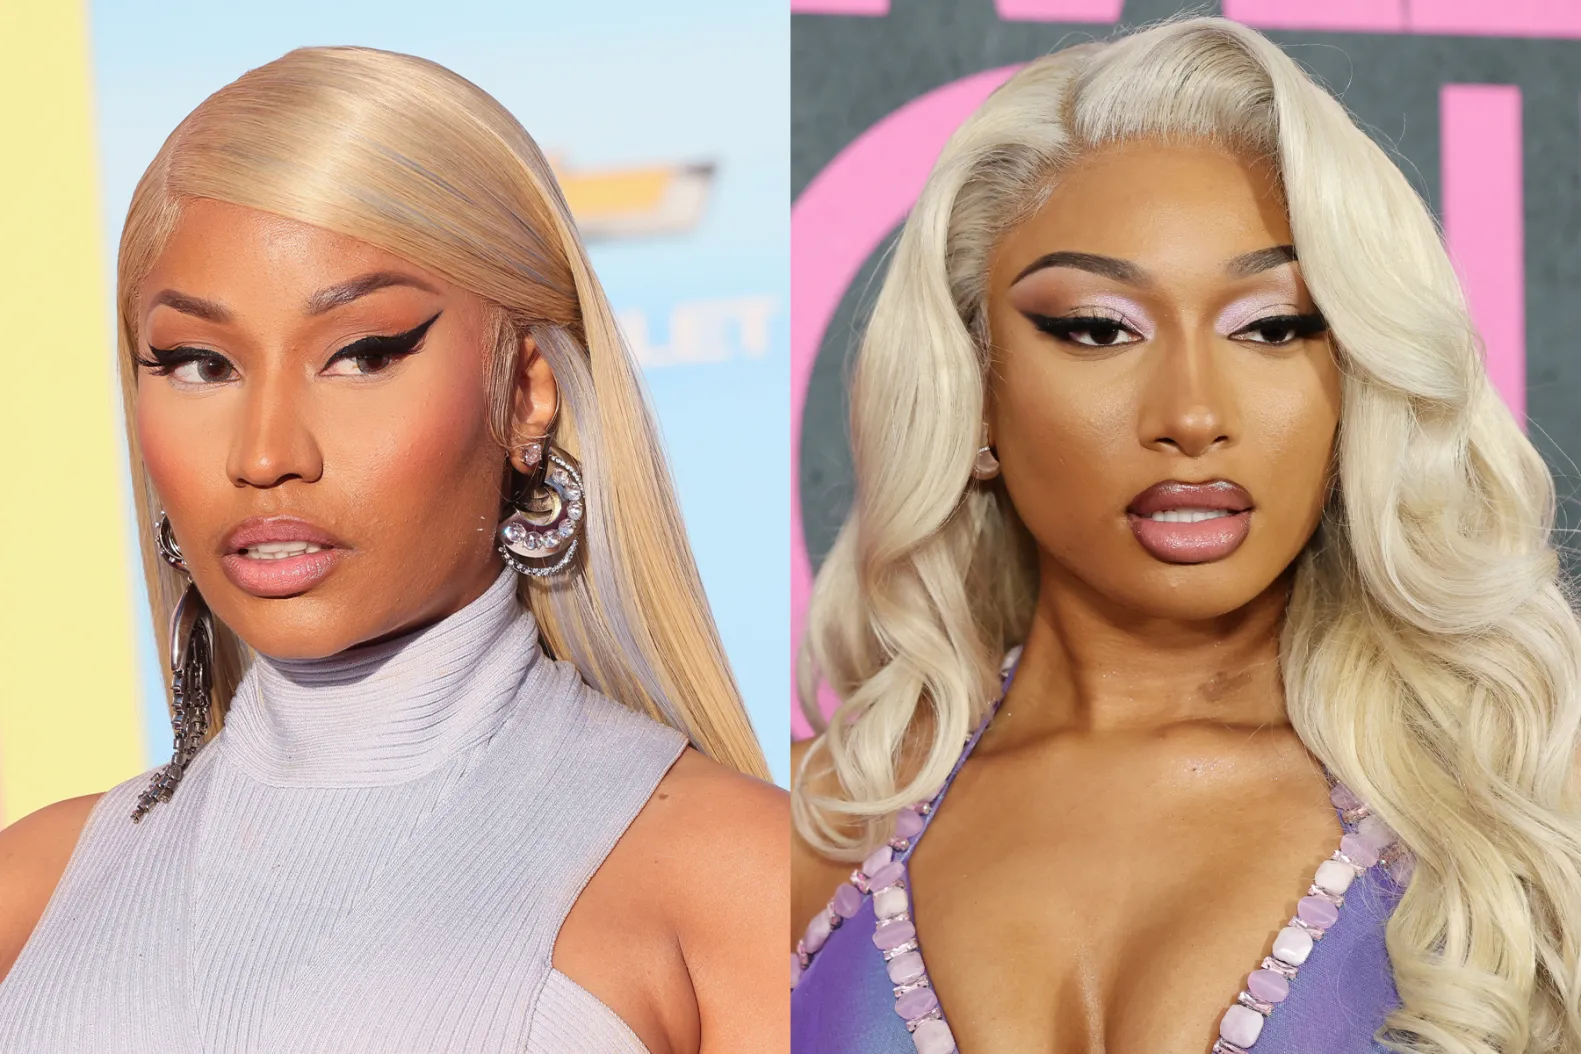 Nicki Minaj fires back at Megan Thee Stallion after apparent diss on new song ‘Hiss’